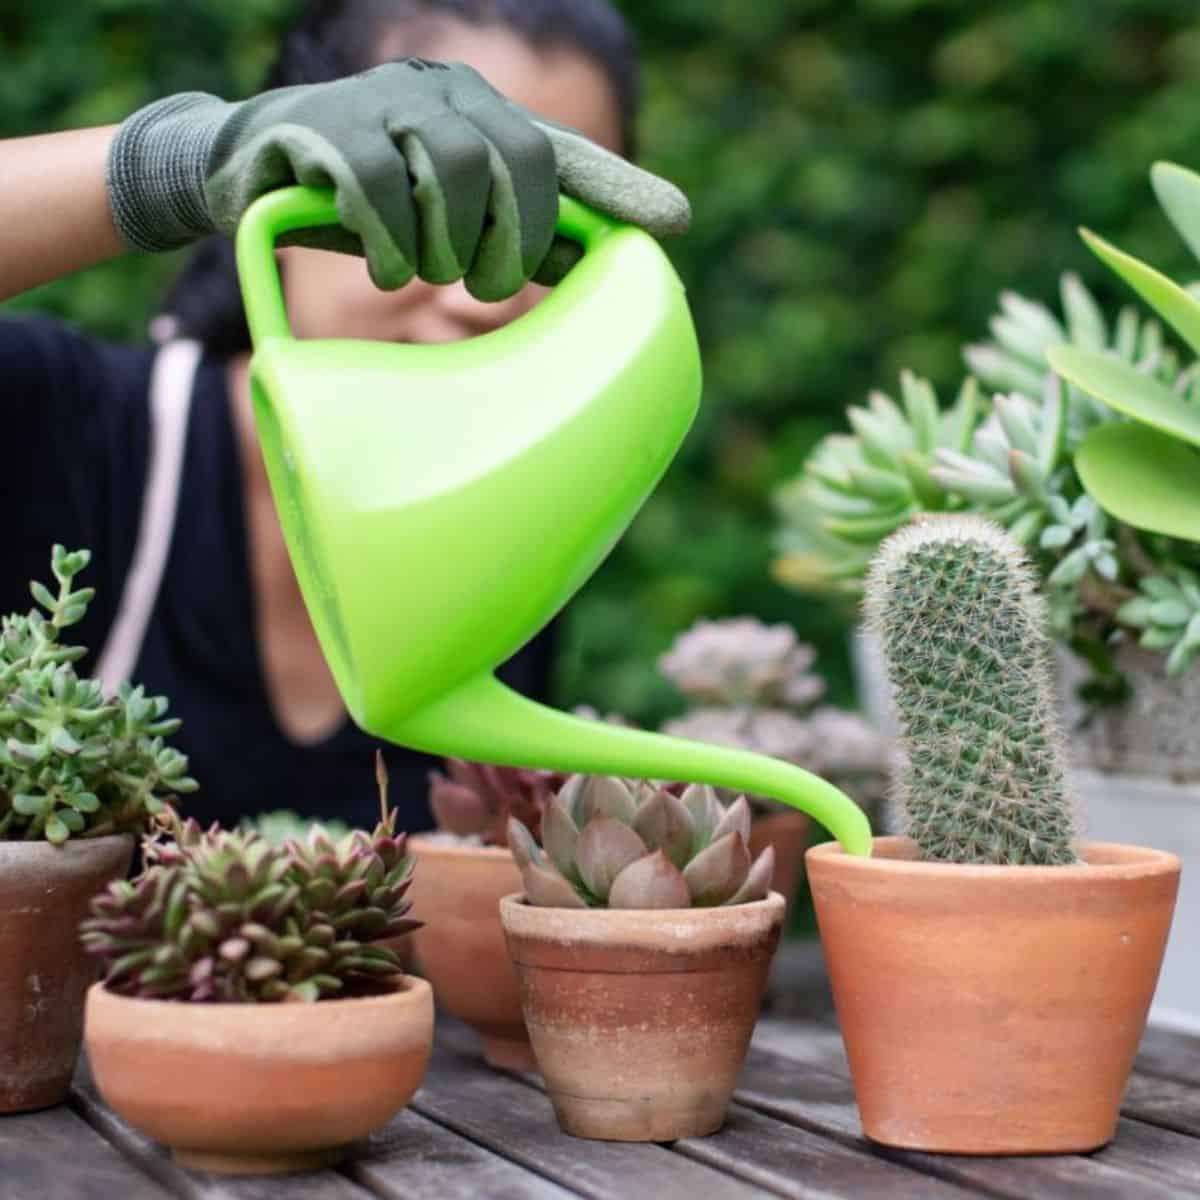 Woman watering succulents in pots with a green watering can..